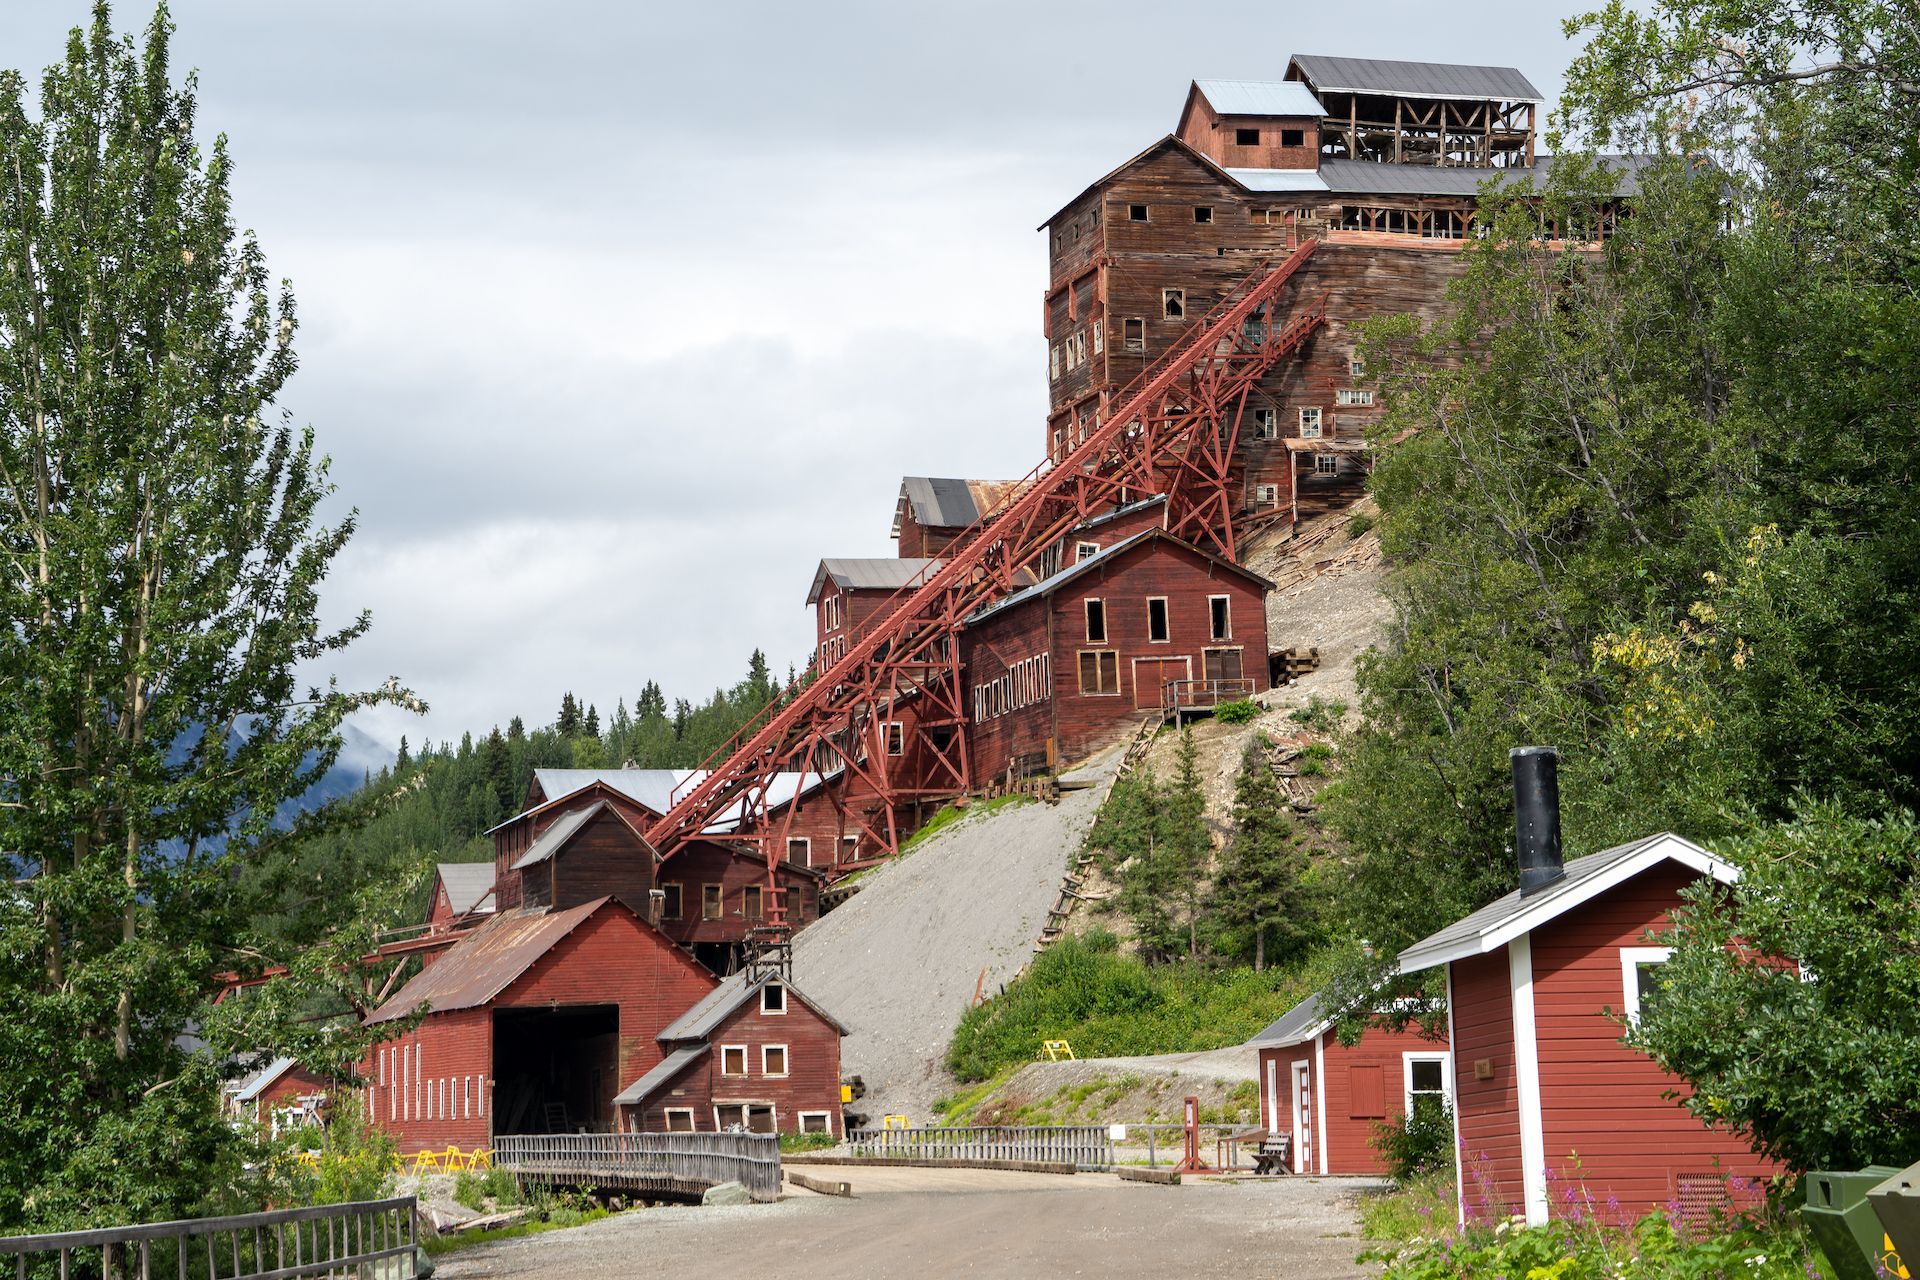 Kennecott Mines National Historic Landmark, an incredible place to visit on your own or with a tour guide like we did